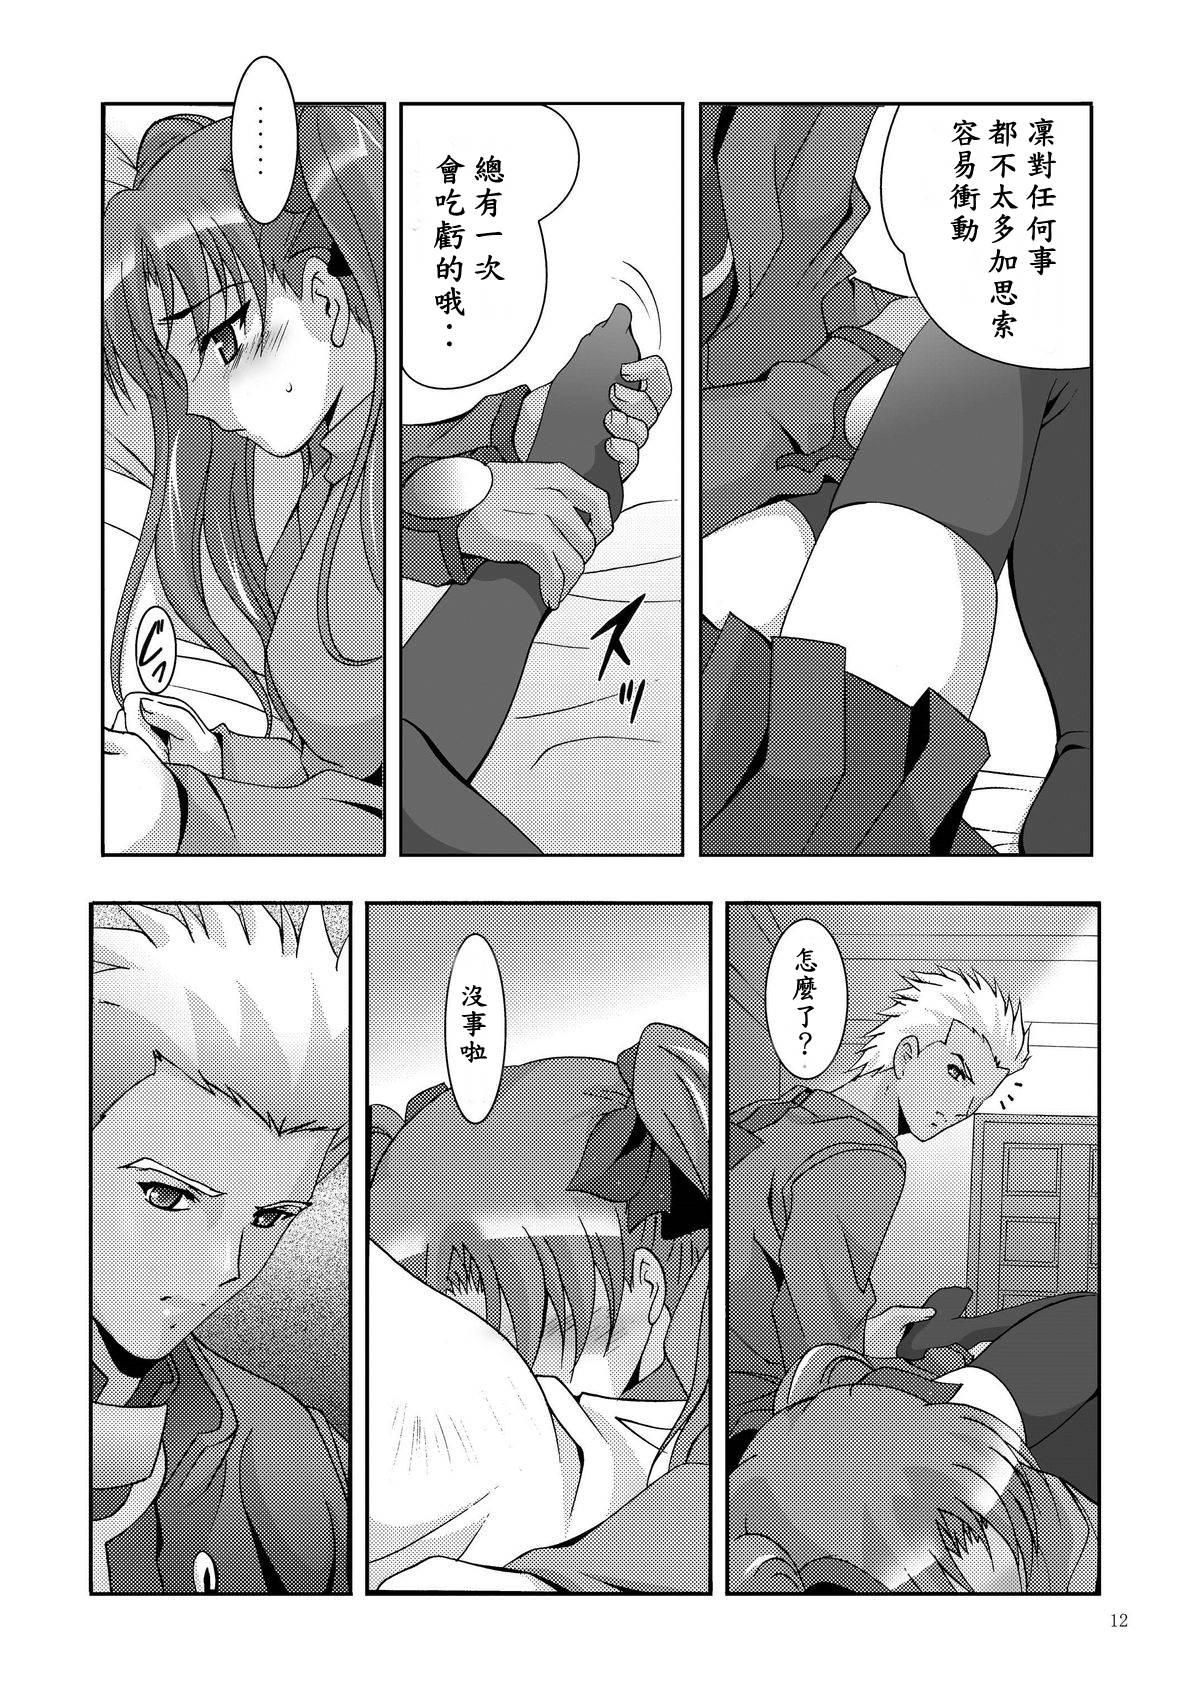 Anal Porn MOUSOU THEATER 19 - Fate stay night Girlfriends - Page 10